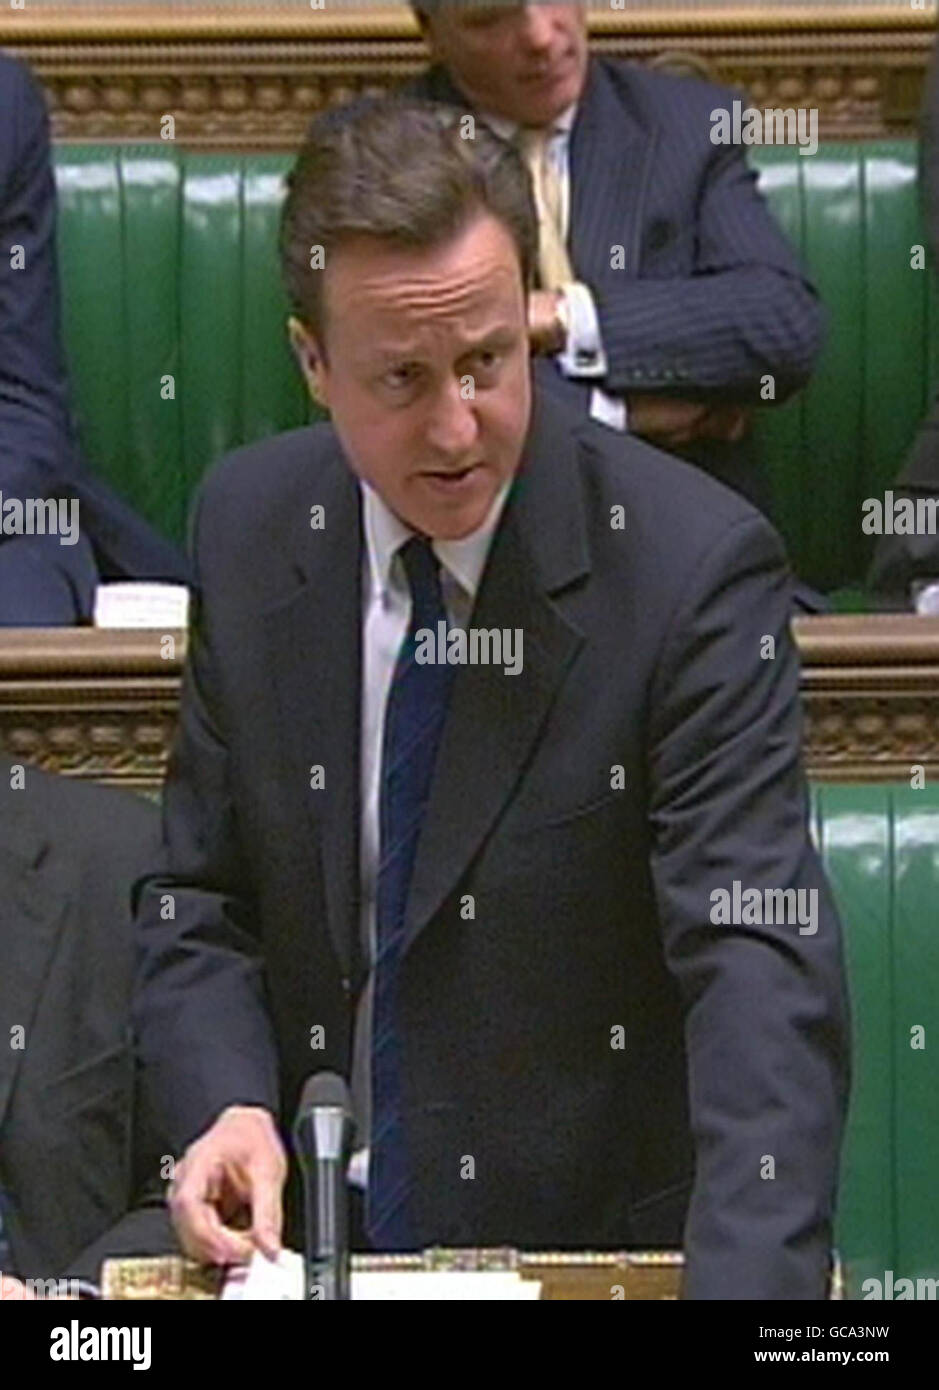 Leader of the Opposition David Cameron responds to Prime Minister Gordon Brown after he gave a statement to the House of Commons, London, where he said that the last loyalist paramilitary organisation to hold arms, the South-East Antrim UDA, had this afternoon 'completed their decommissioning'. Stock Photo